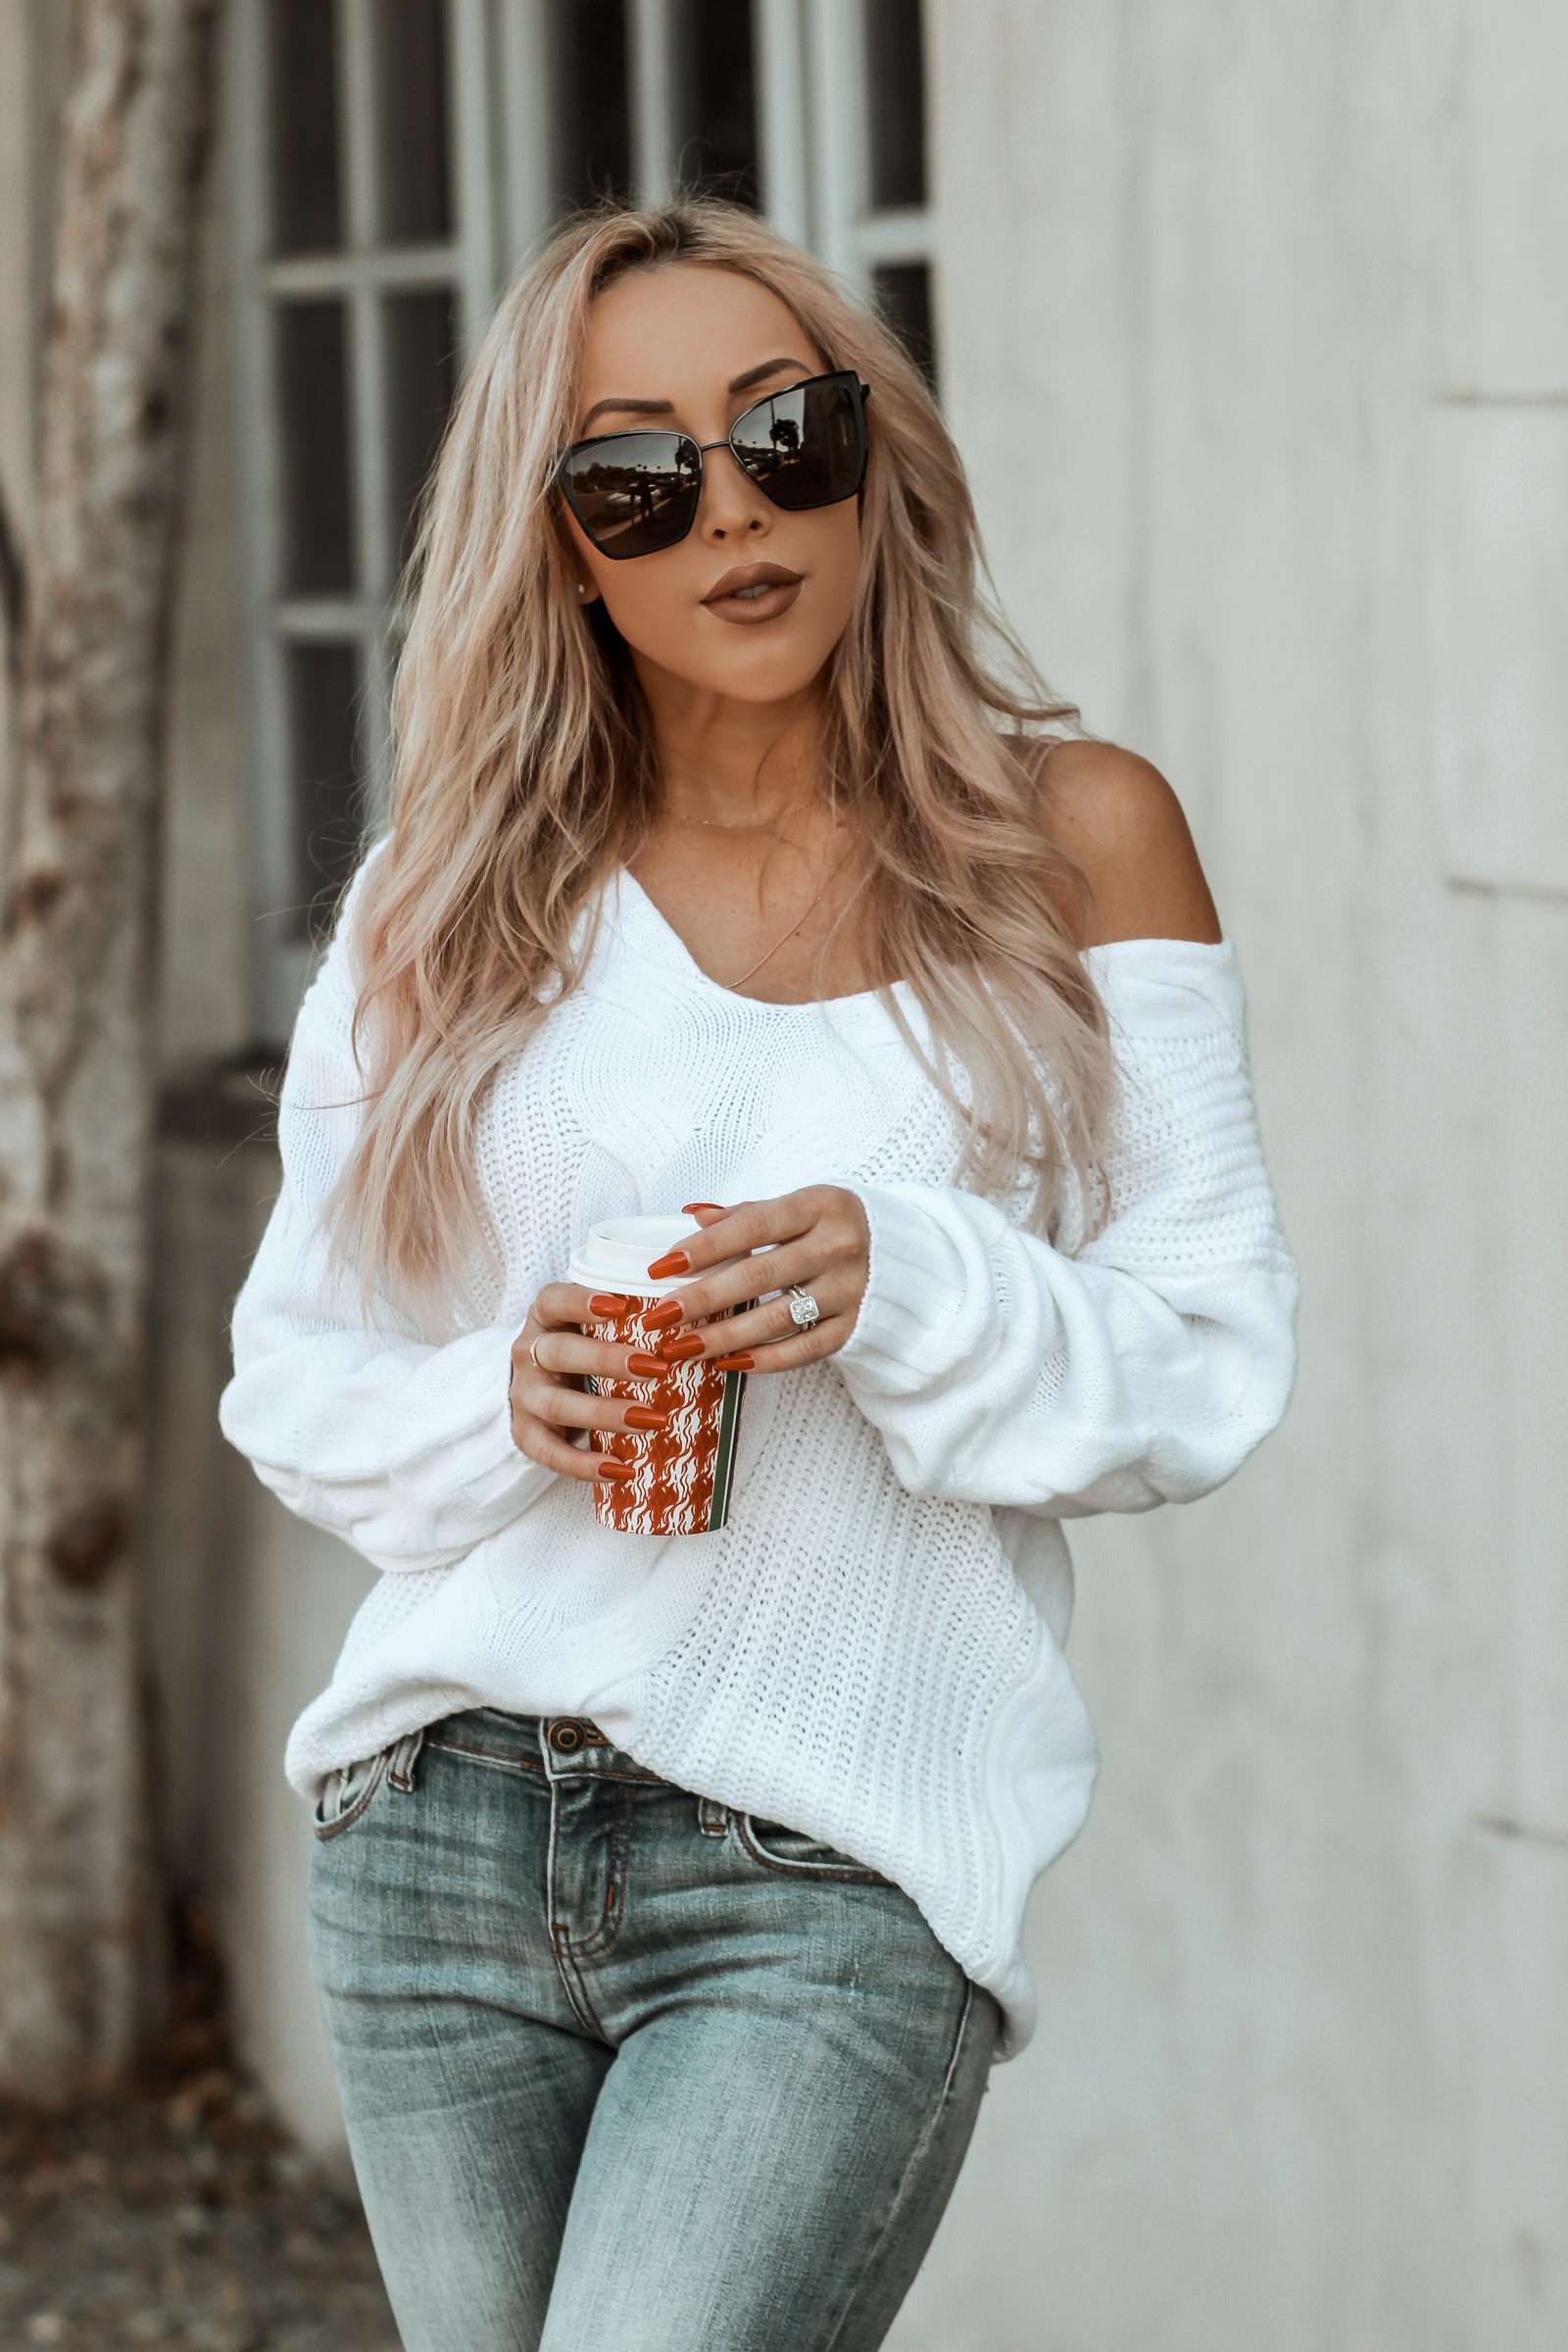 Fall Fashion | White Sweater | Fall Vibes | Cozy Weather | Blondie in the City by Hayley Larue